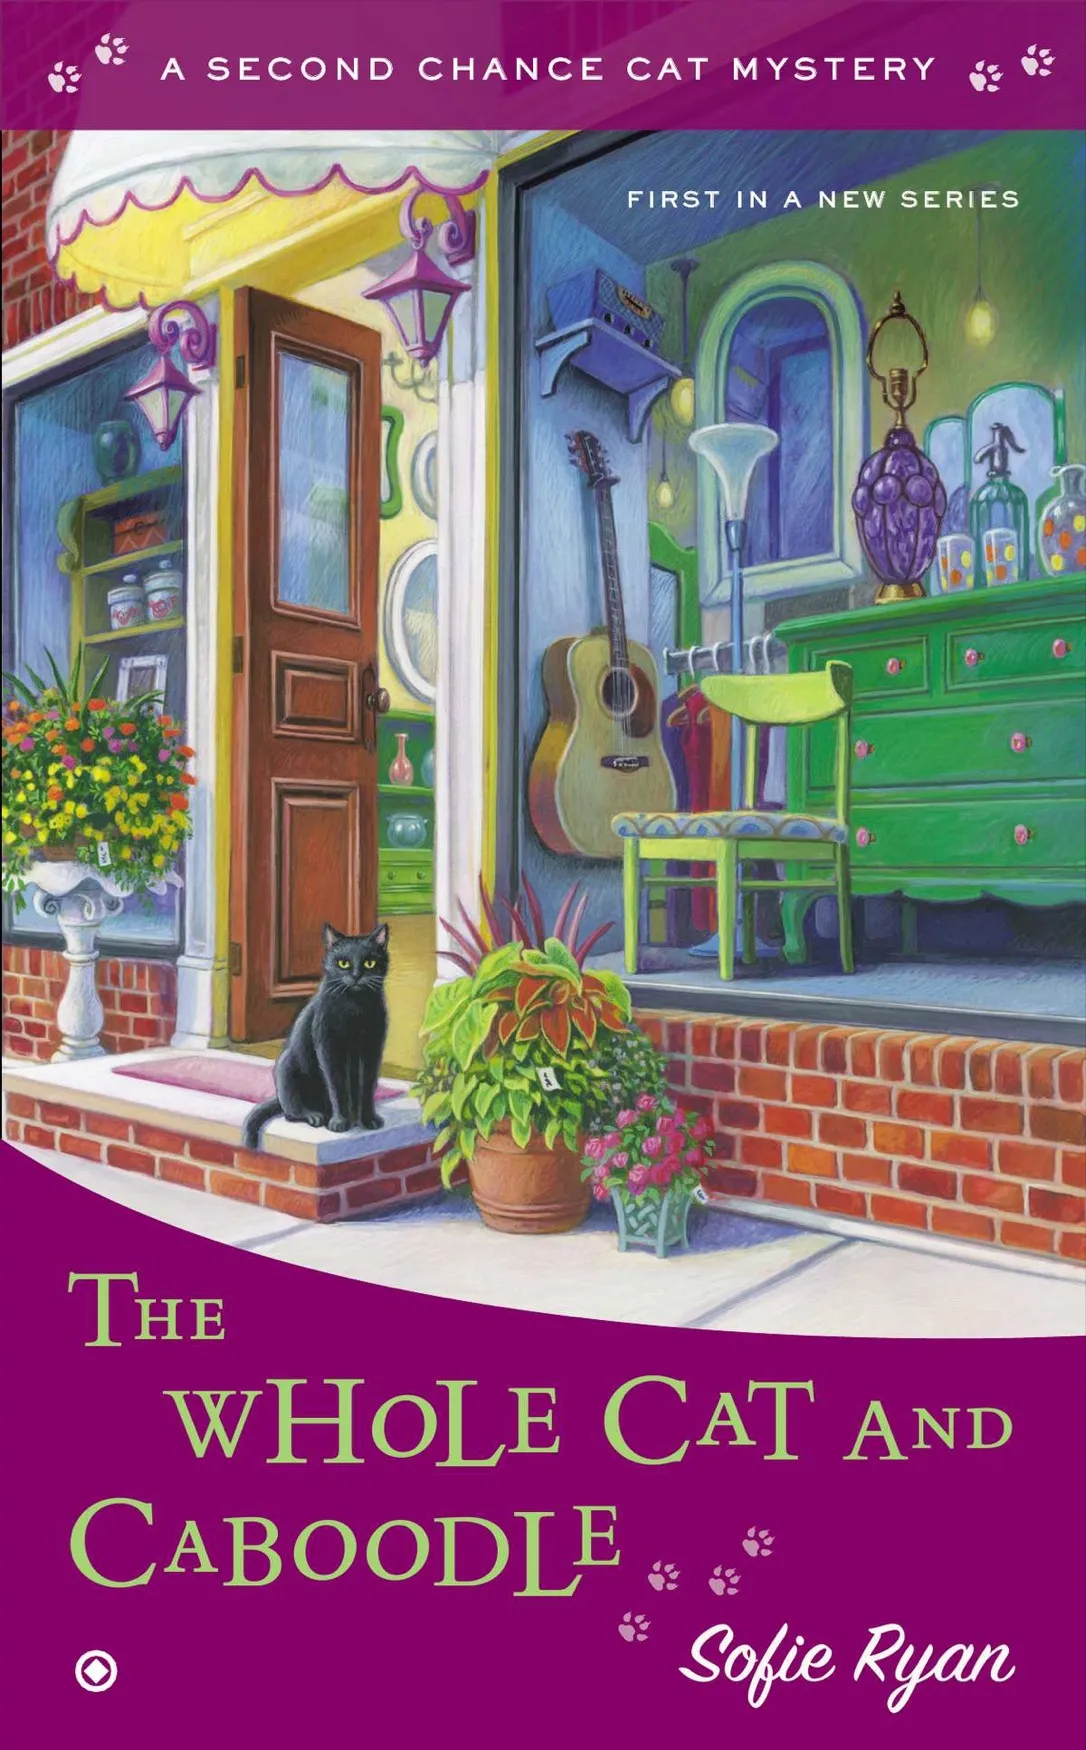 The Whole Cat and Caboodle (Second Chance Cat Mystery #1)